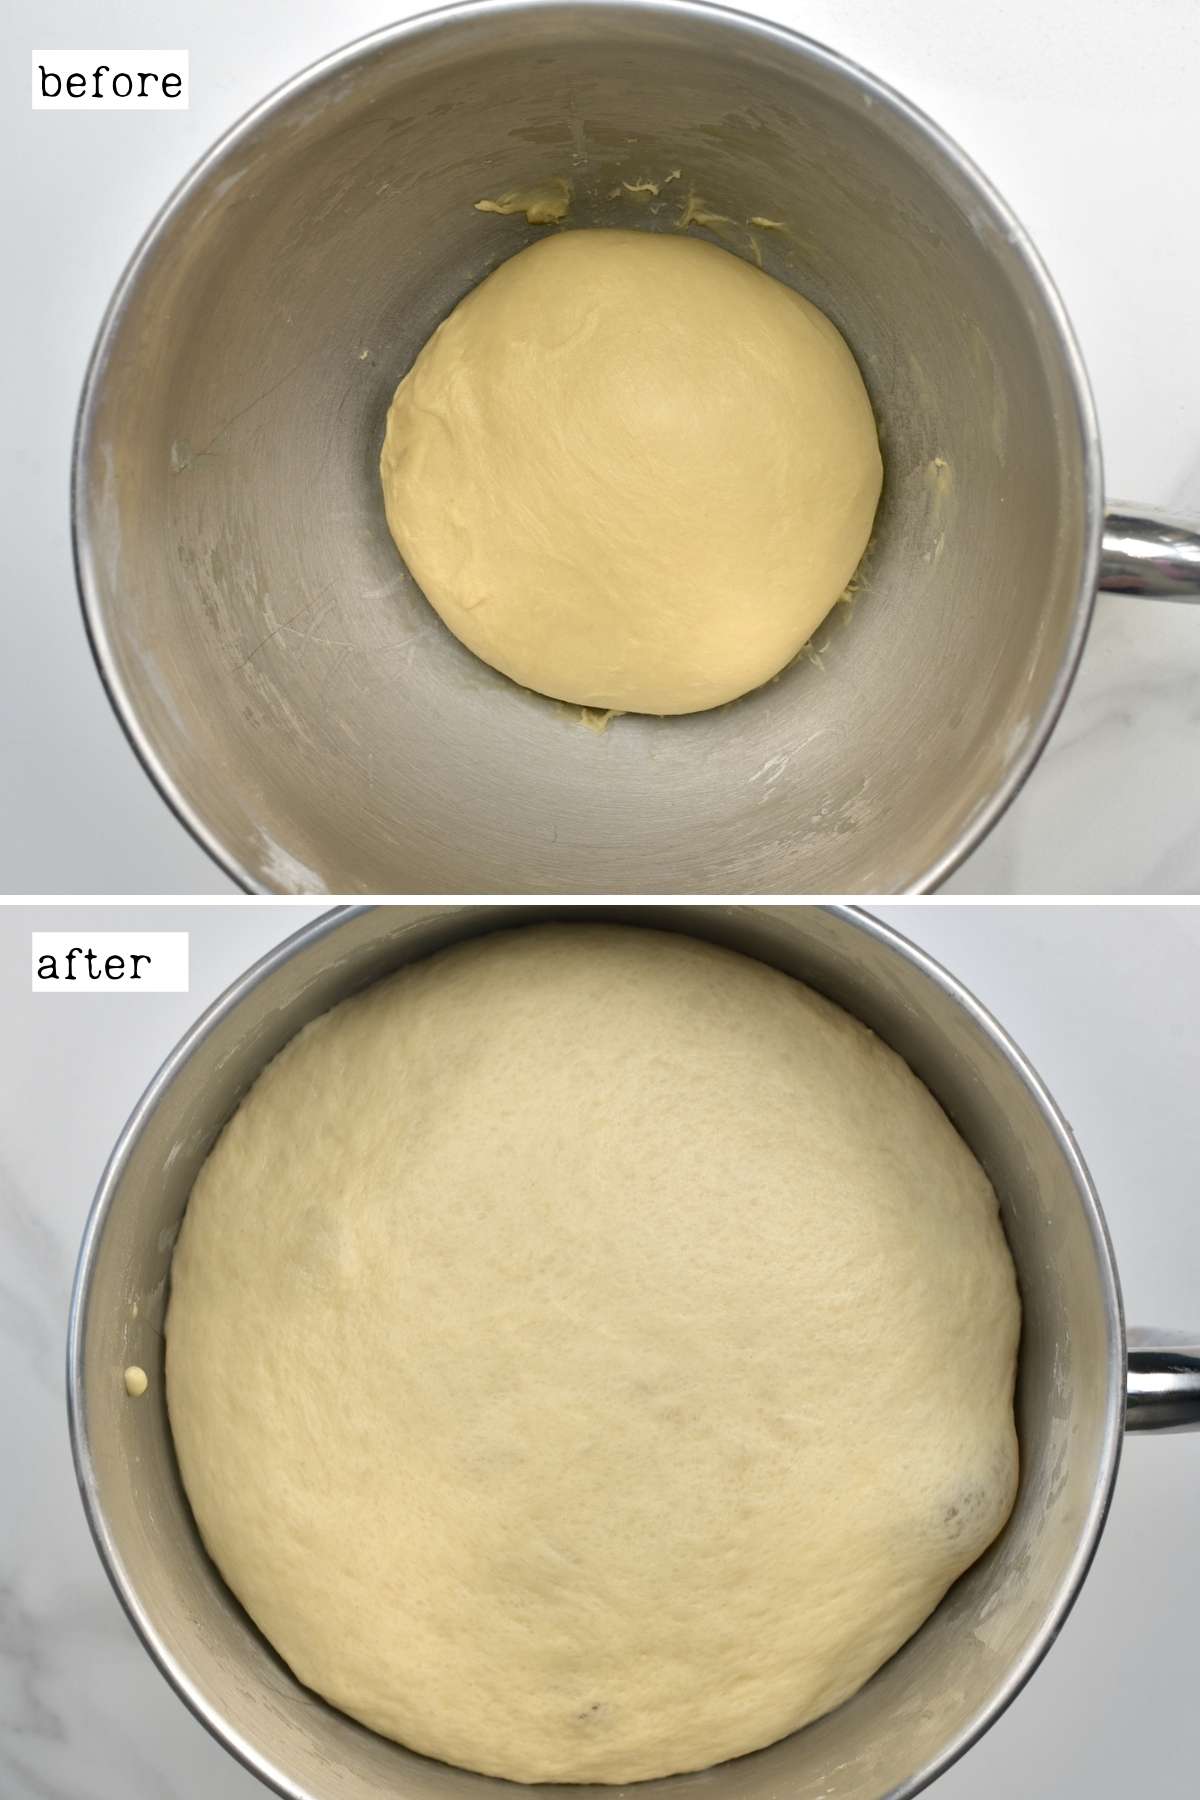 Before and after rising brioche dough